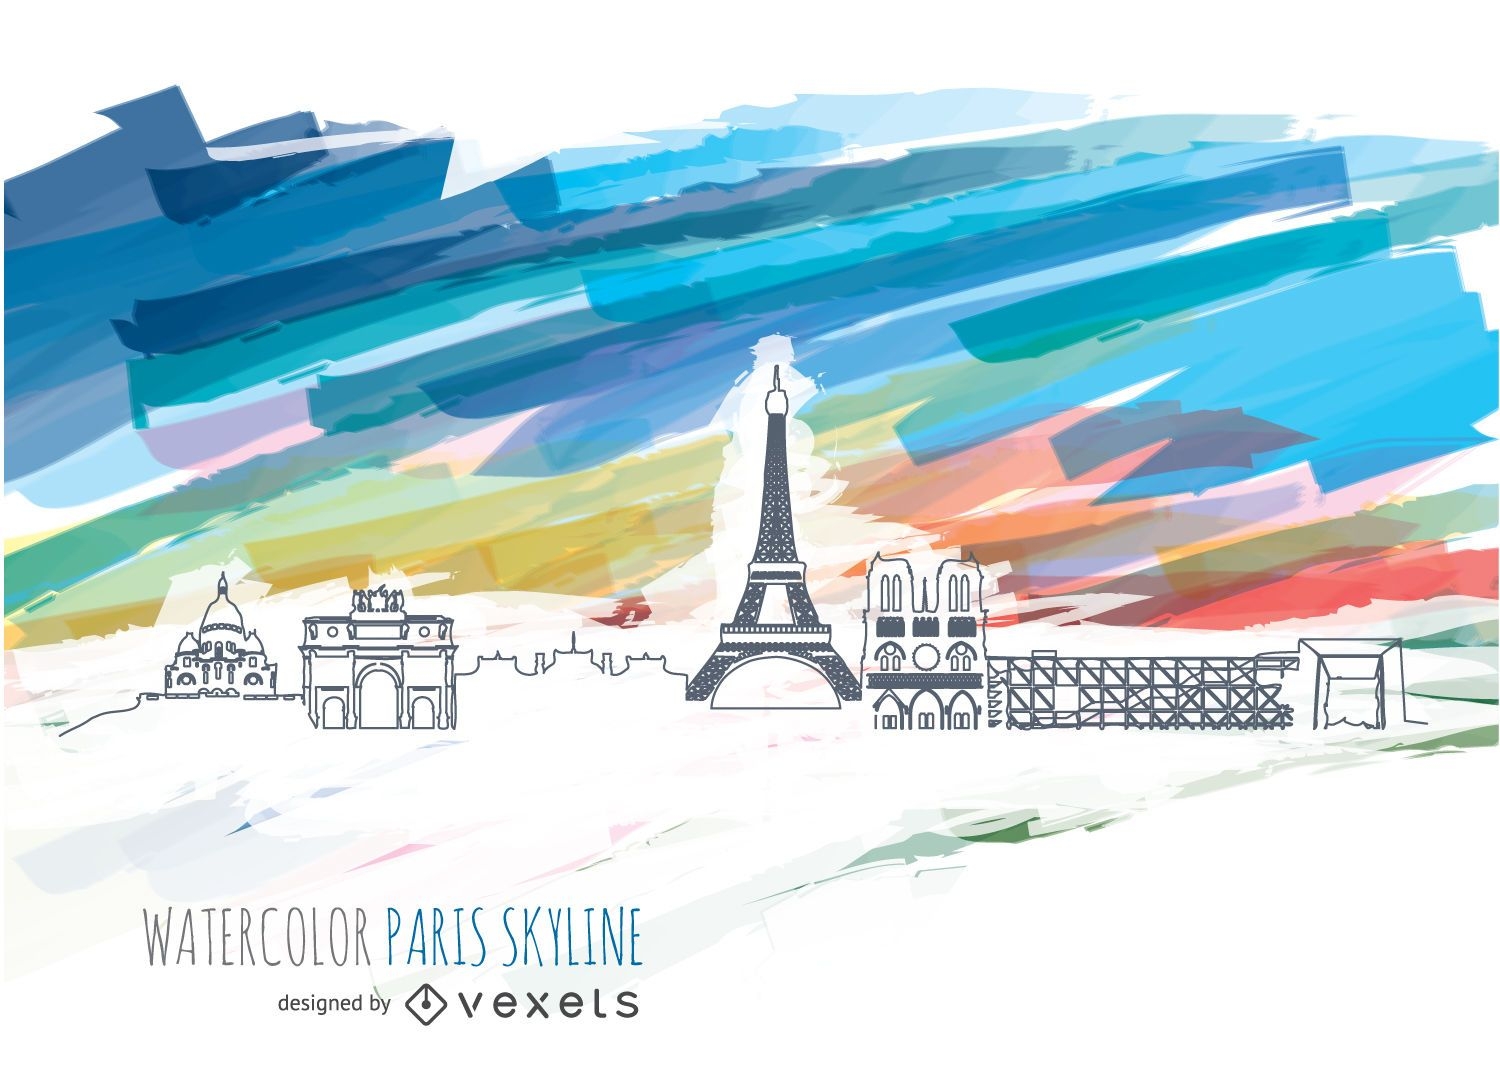 Paris Skyline with watercolor background